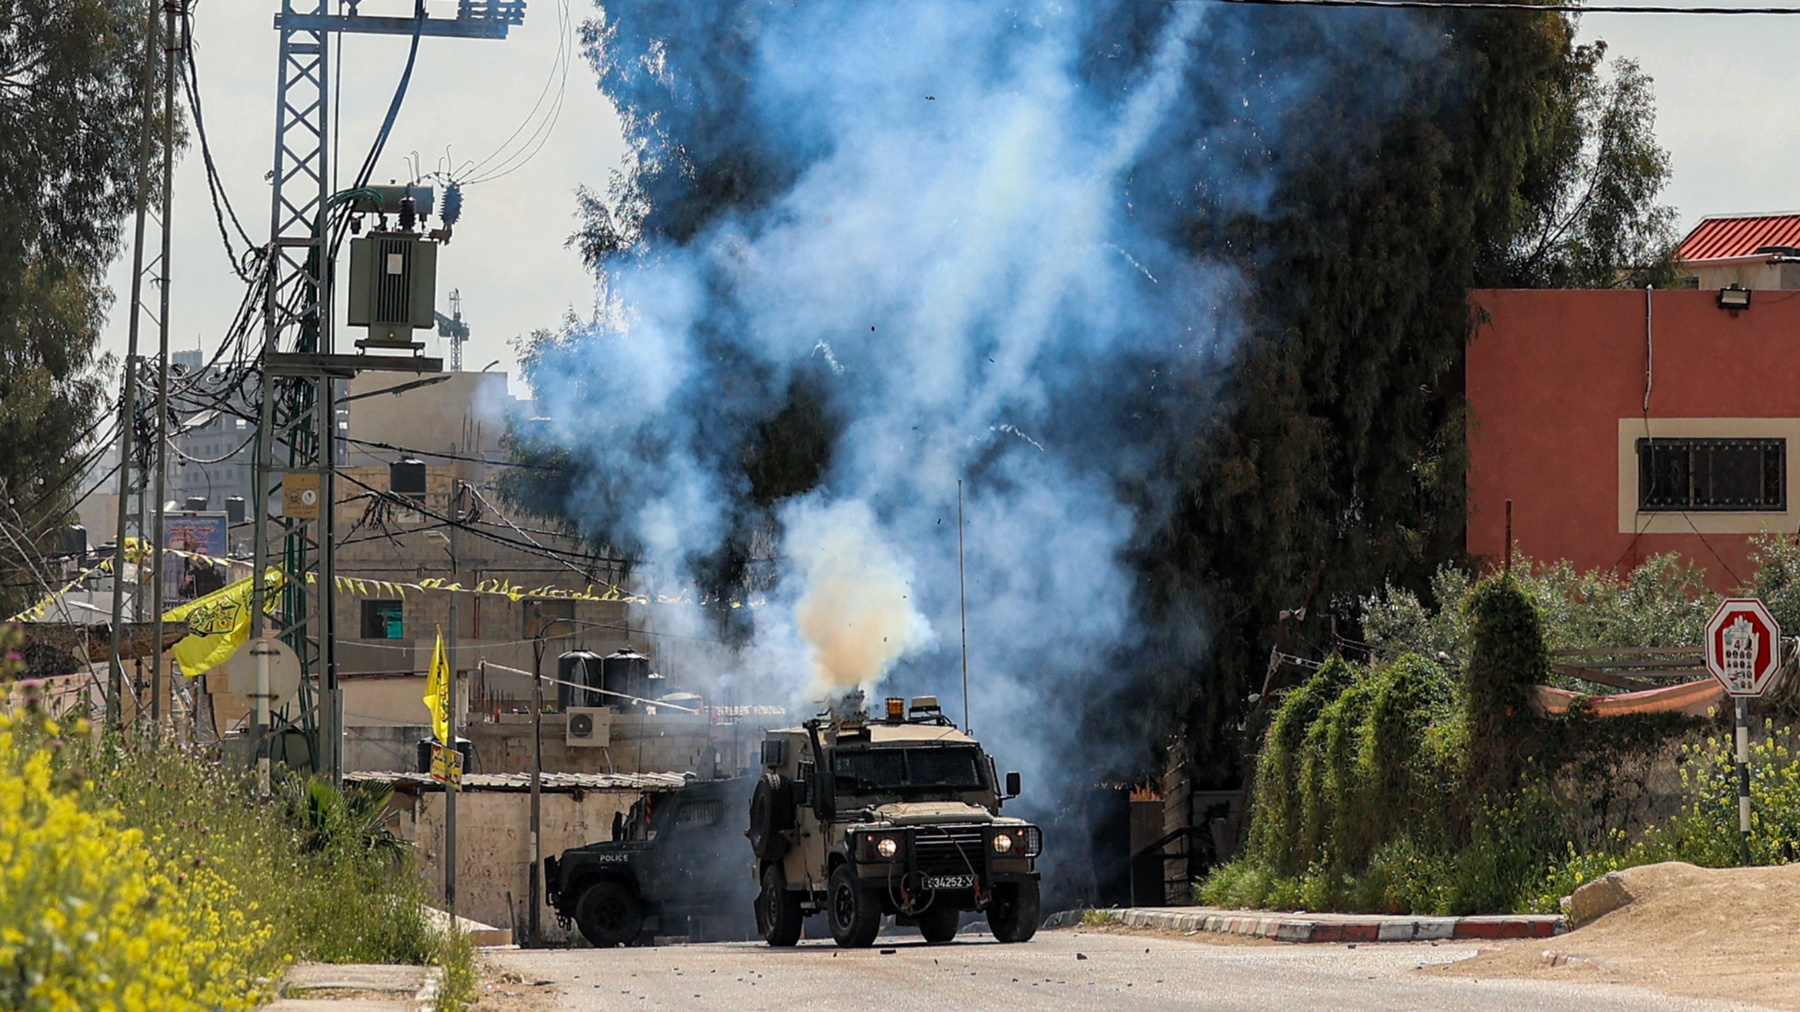 Tear gas canisters are fired from an Israeli military vehicle near the Palestinian refugee camp of Jenin in the occupied West Bank on 9 April 2022 (AFP)